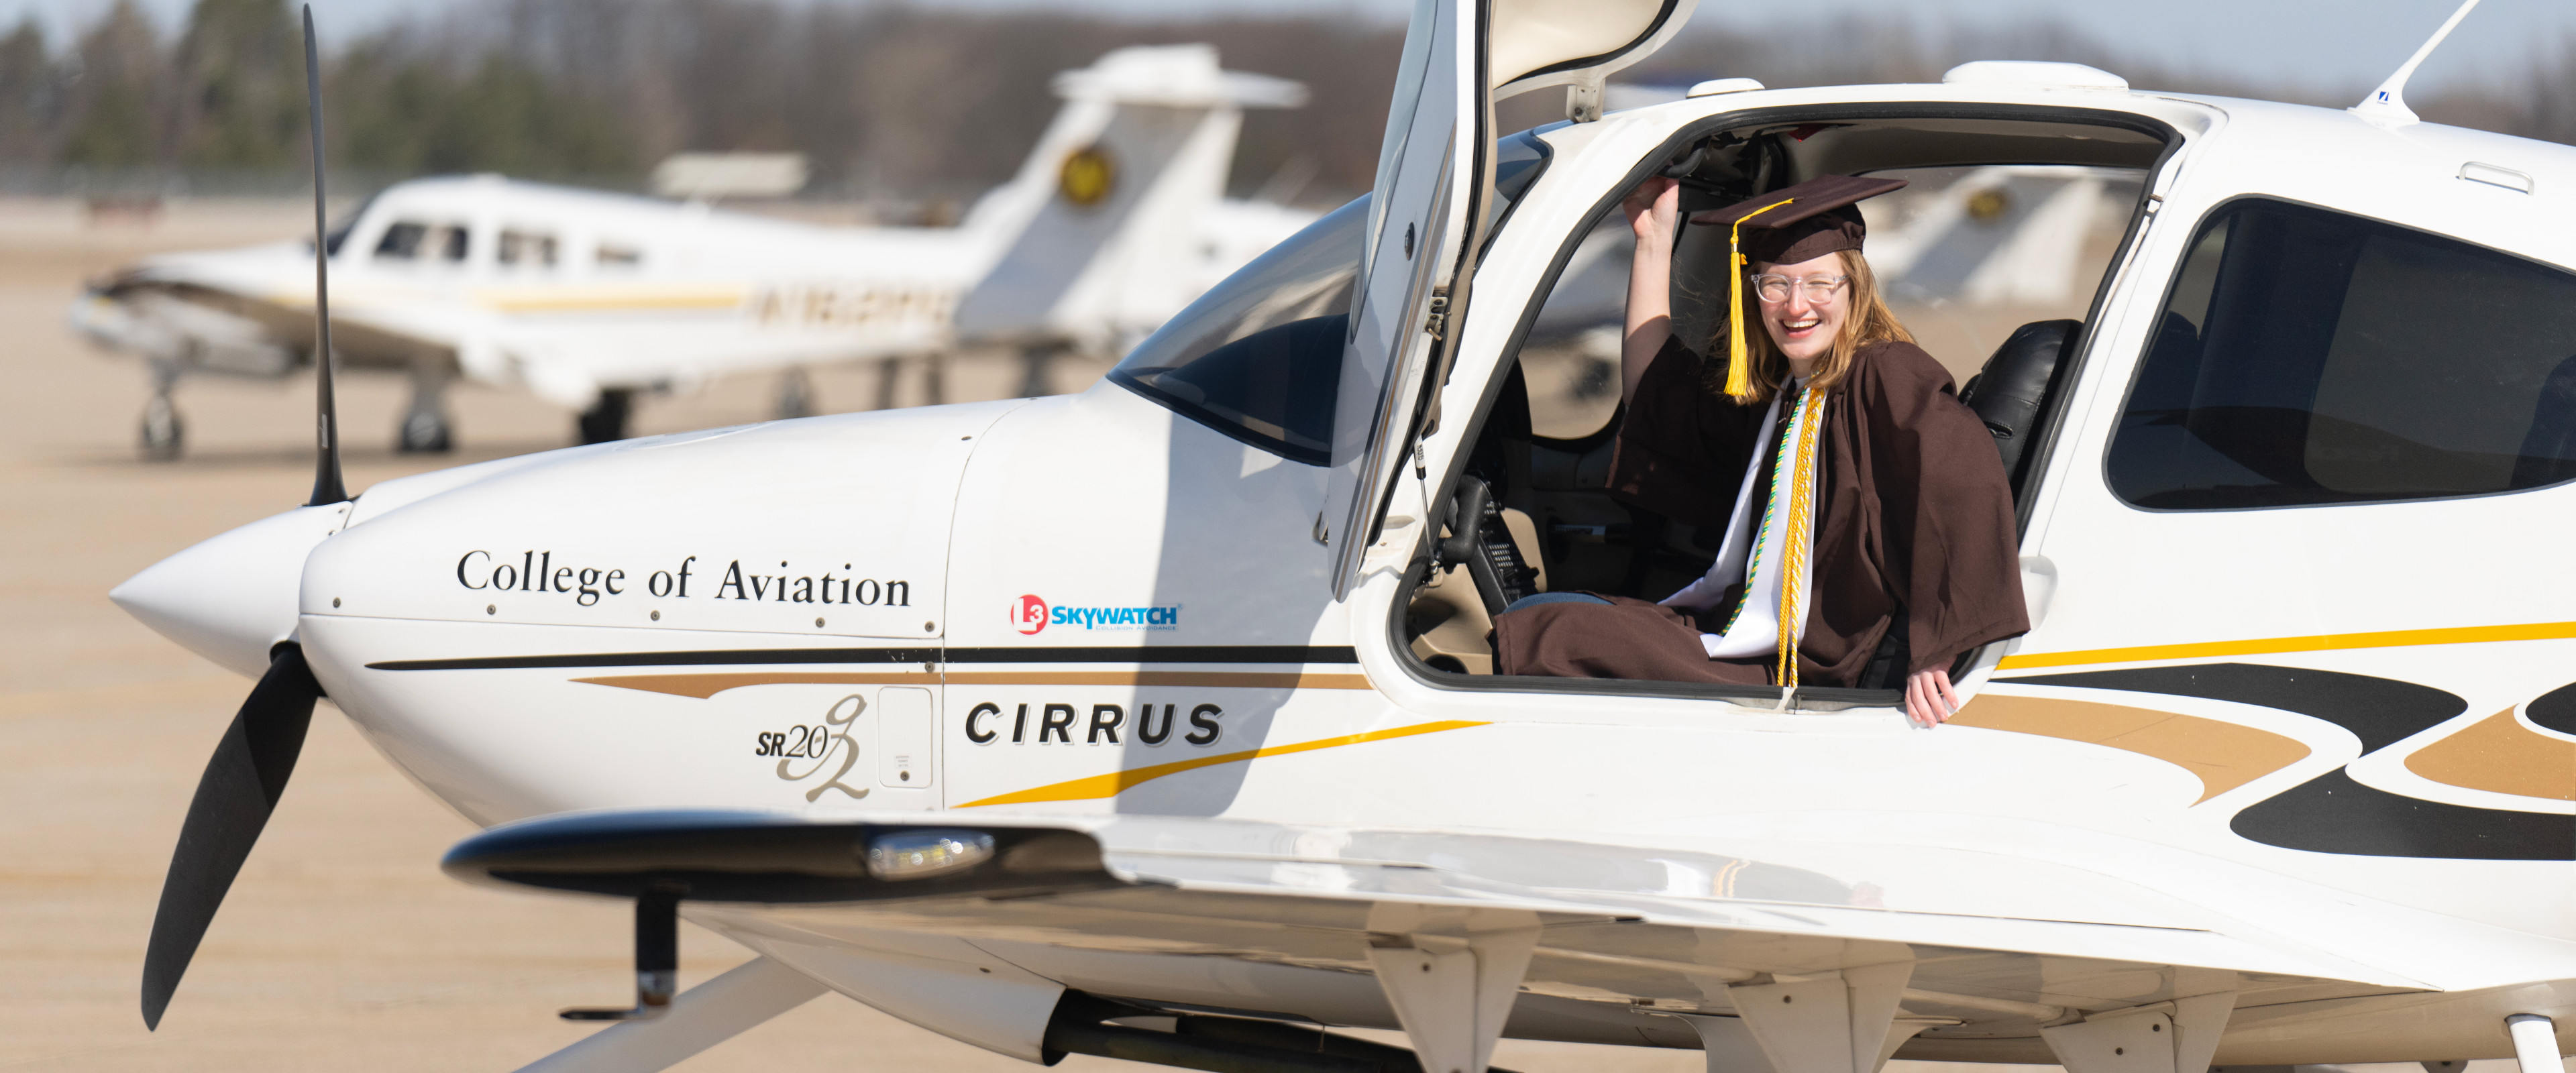 Laila Stein, dressed her graduation cap and gown, sits in the cockpit of a small College of Aviation airplane.